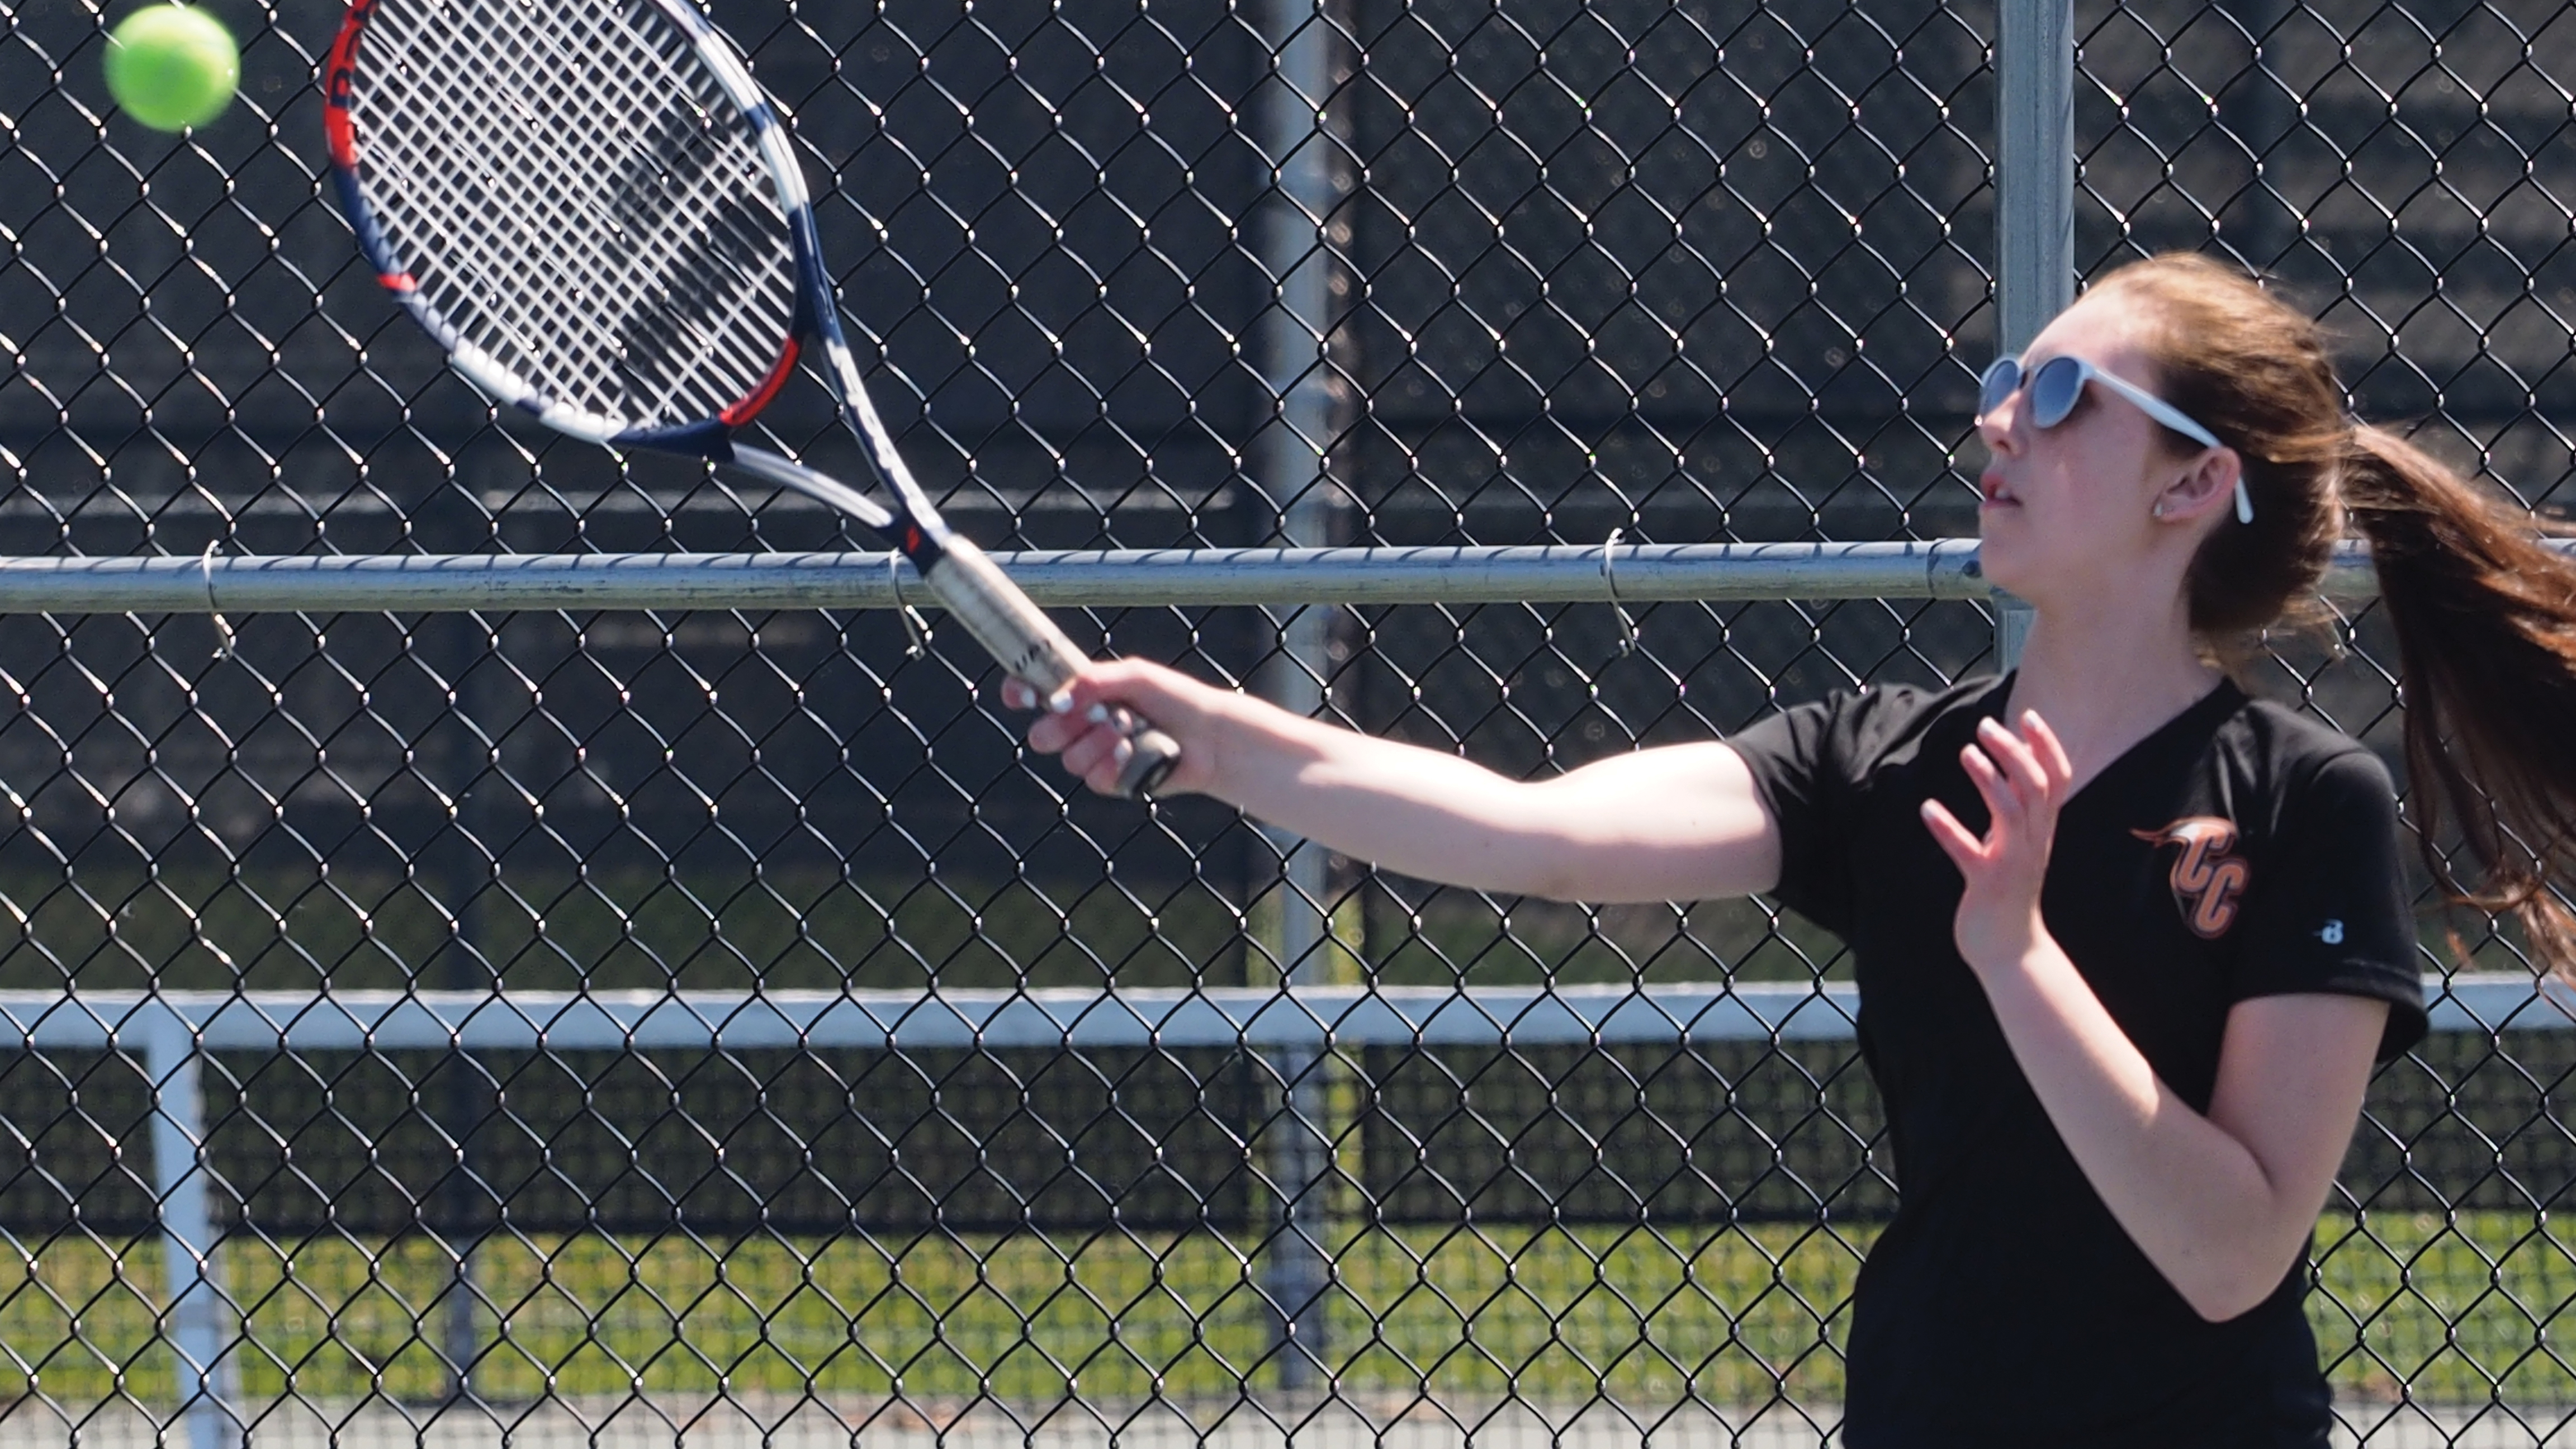 Comets place 5th at North Central Tennis Conference Tourney